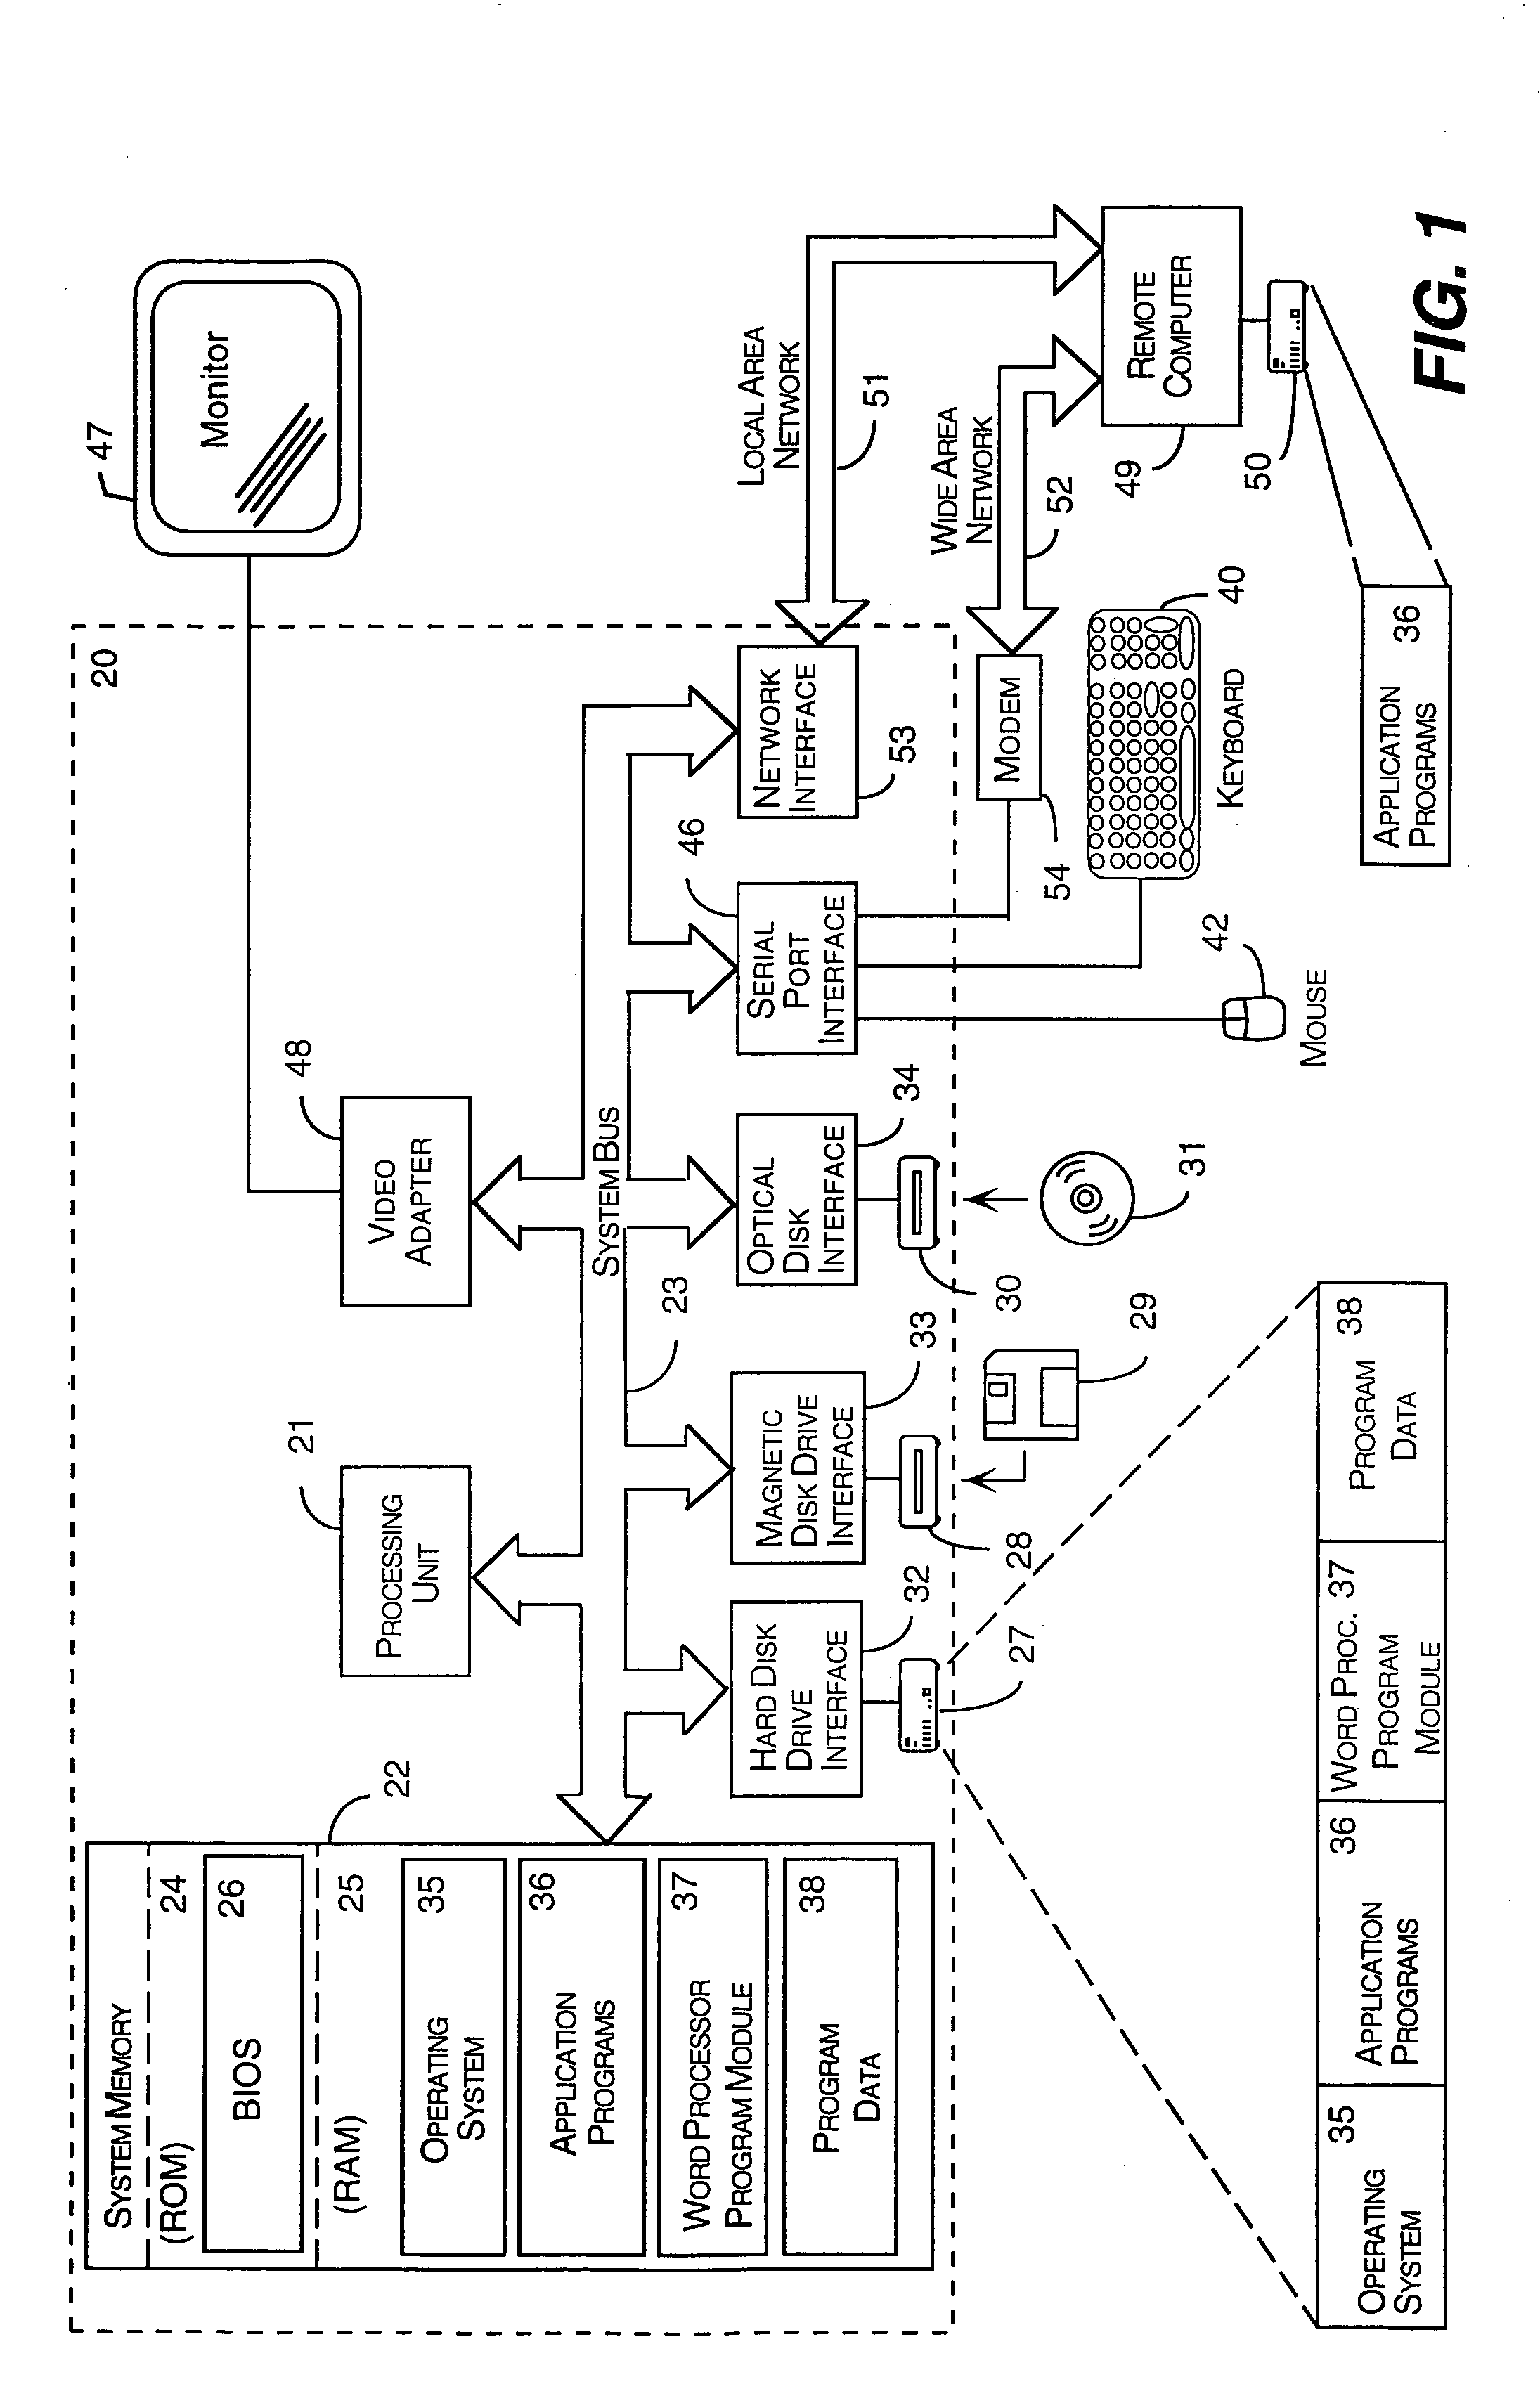 Method and system for semantically labeling strings and providing actions based on semantically labeled strings